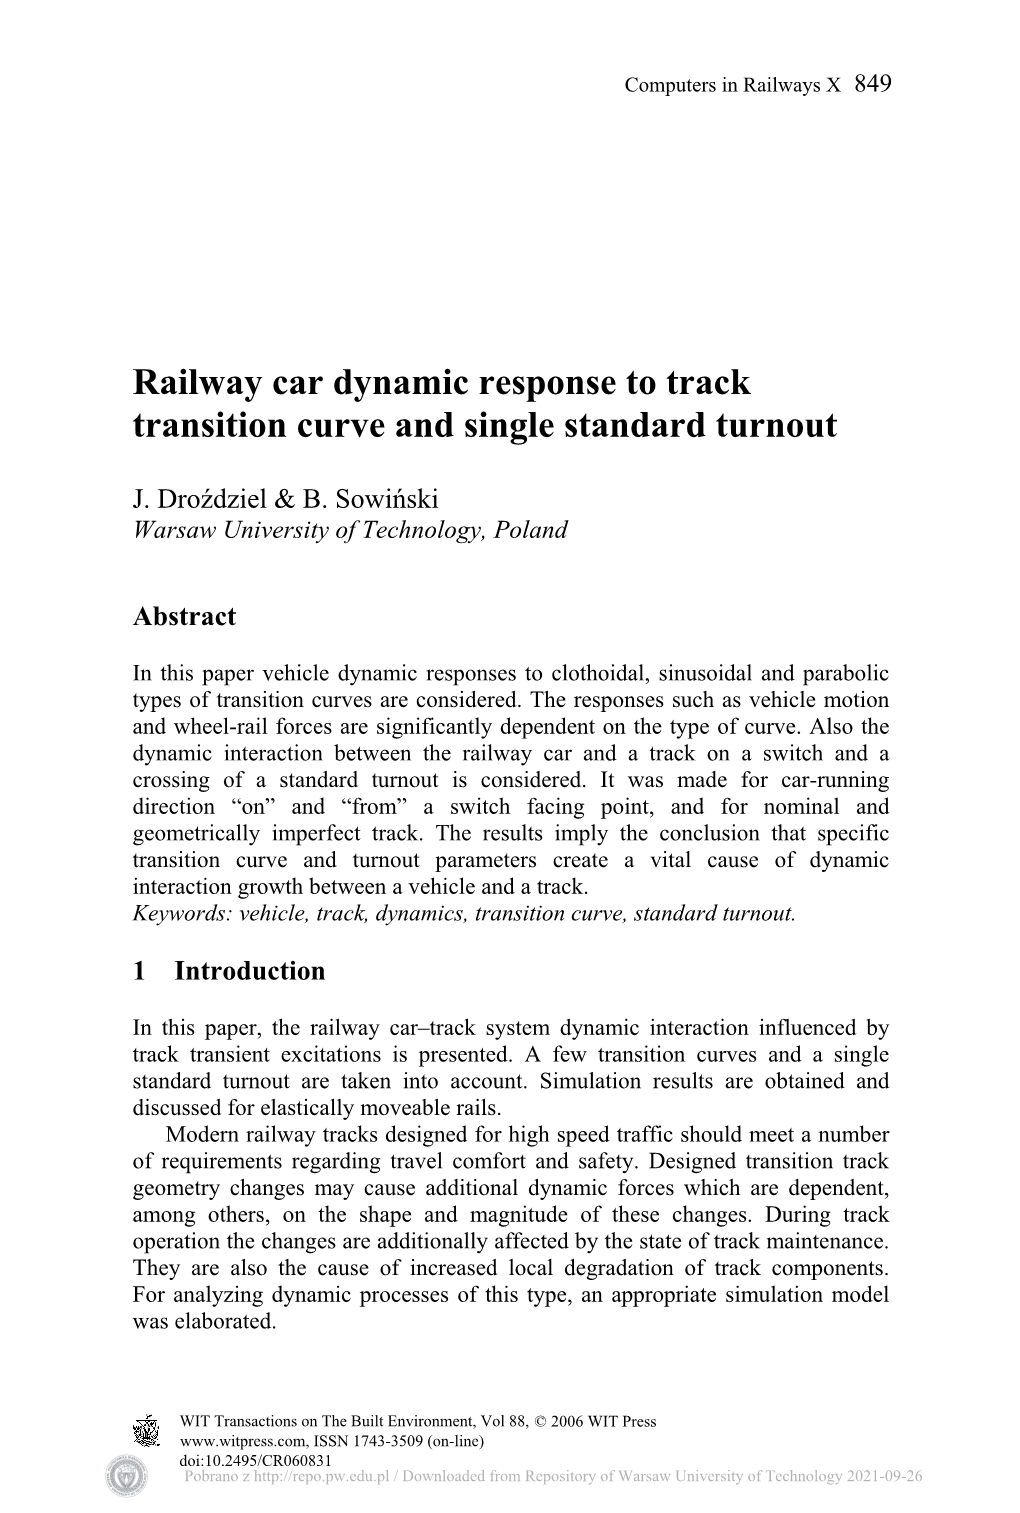 Railway Car Dynamic Response to Track Transition Curve and Single Standard Turnout